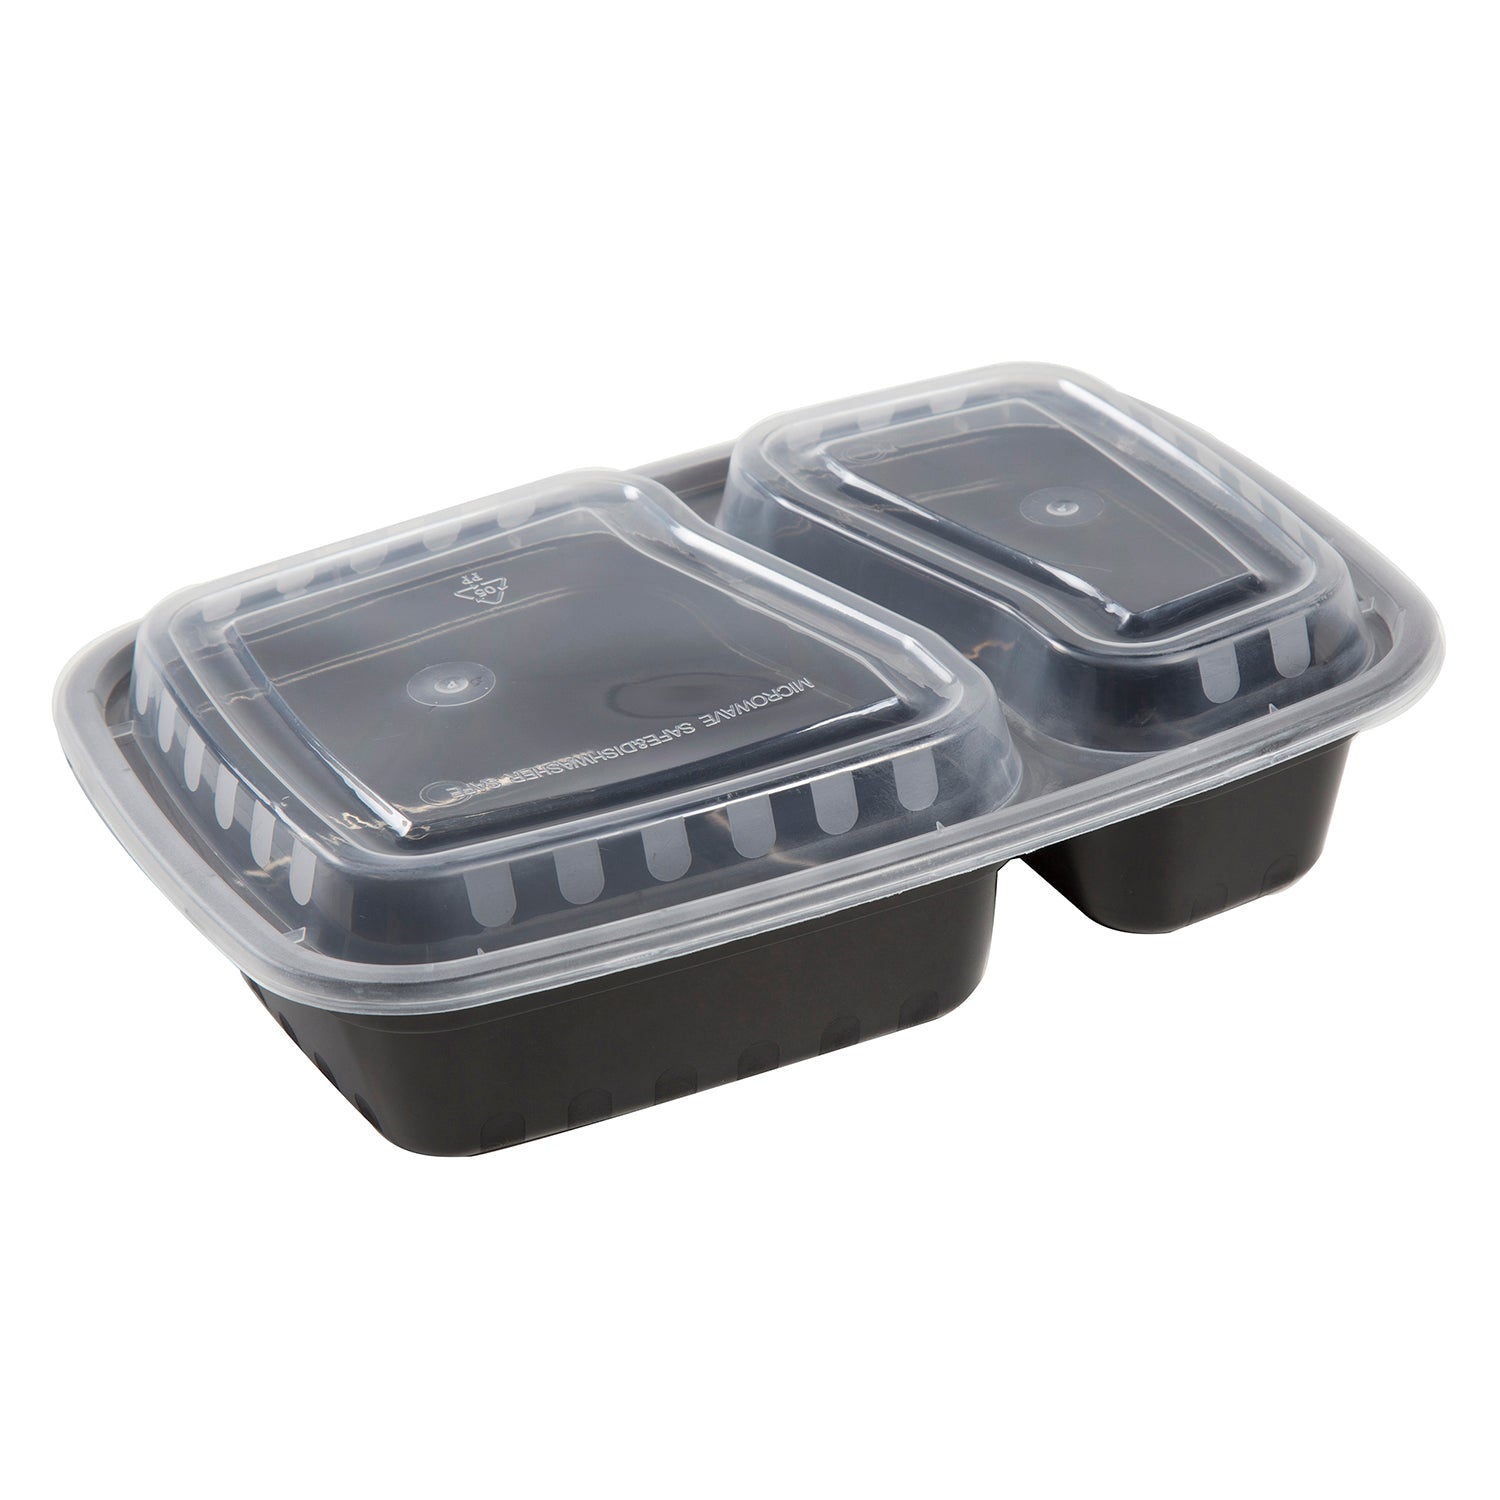 Metronic Meal Prep Containers 32 oz 50 Pack Food Storage Containers 2 Compartment , Reusable Plastic Food Containers with Lids, Size: 32oz, Black